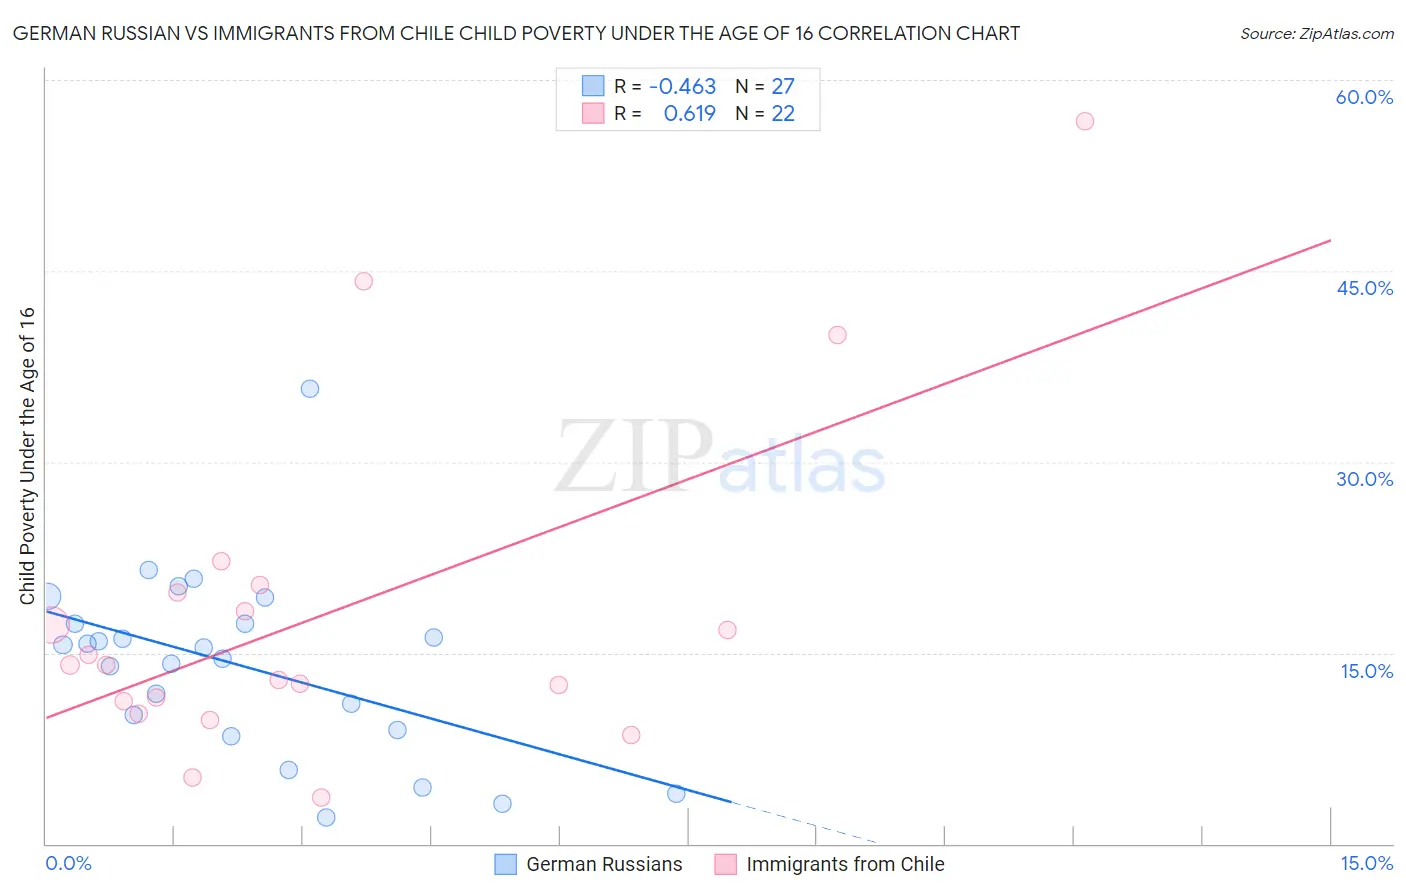 German Russian vs Immigrants from Chile Child Poverty Under the Age of 16